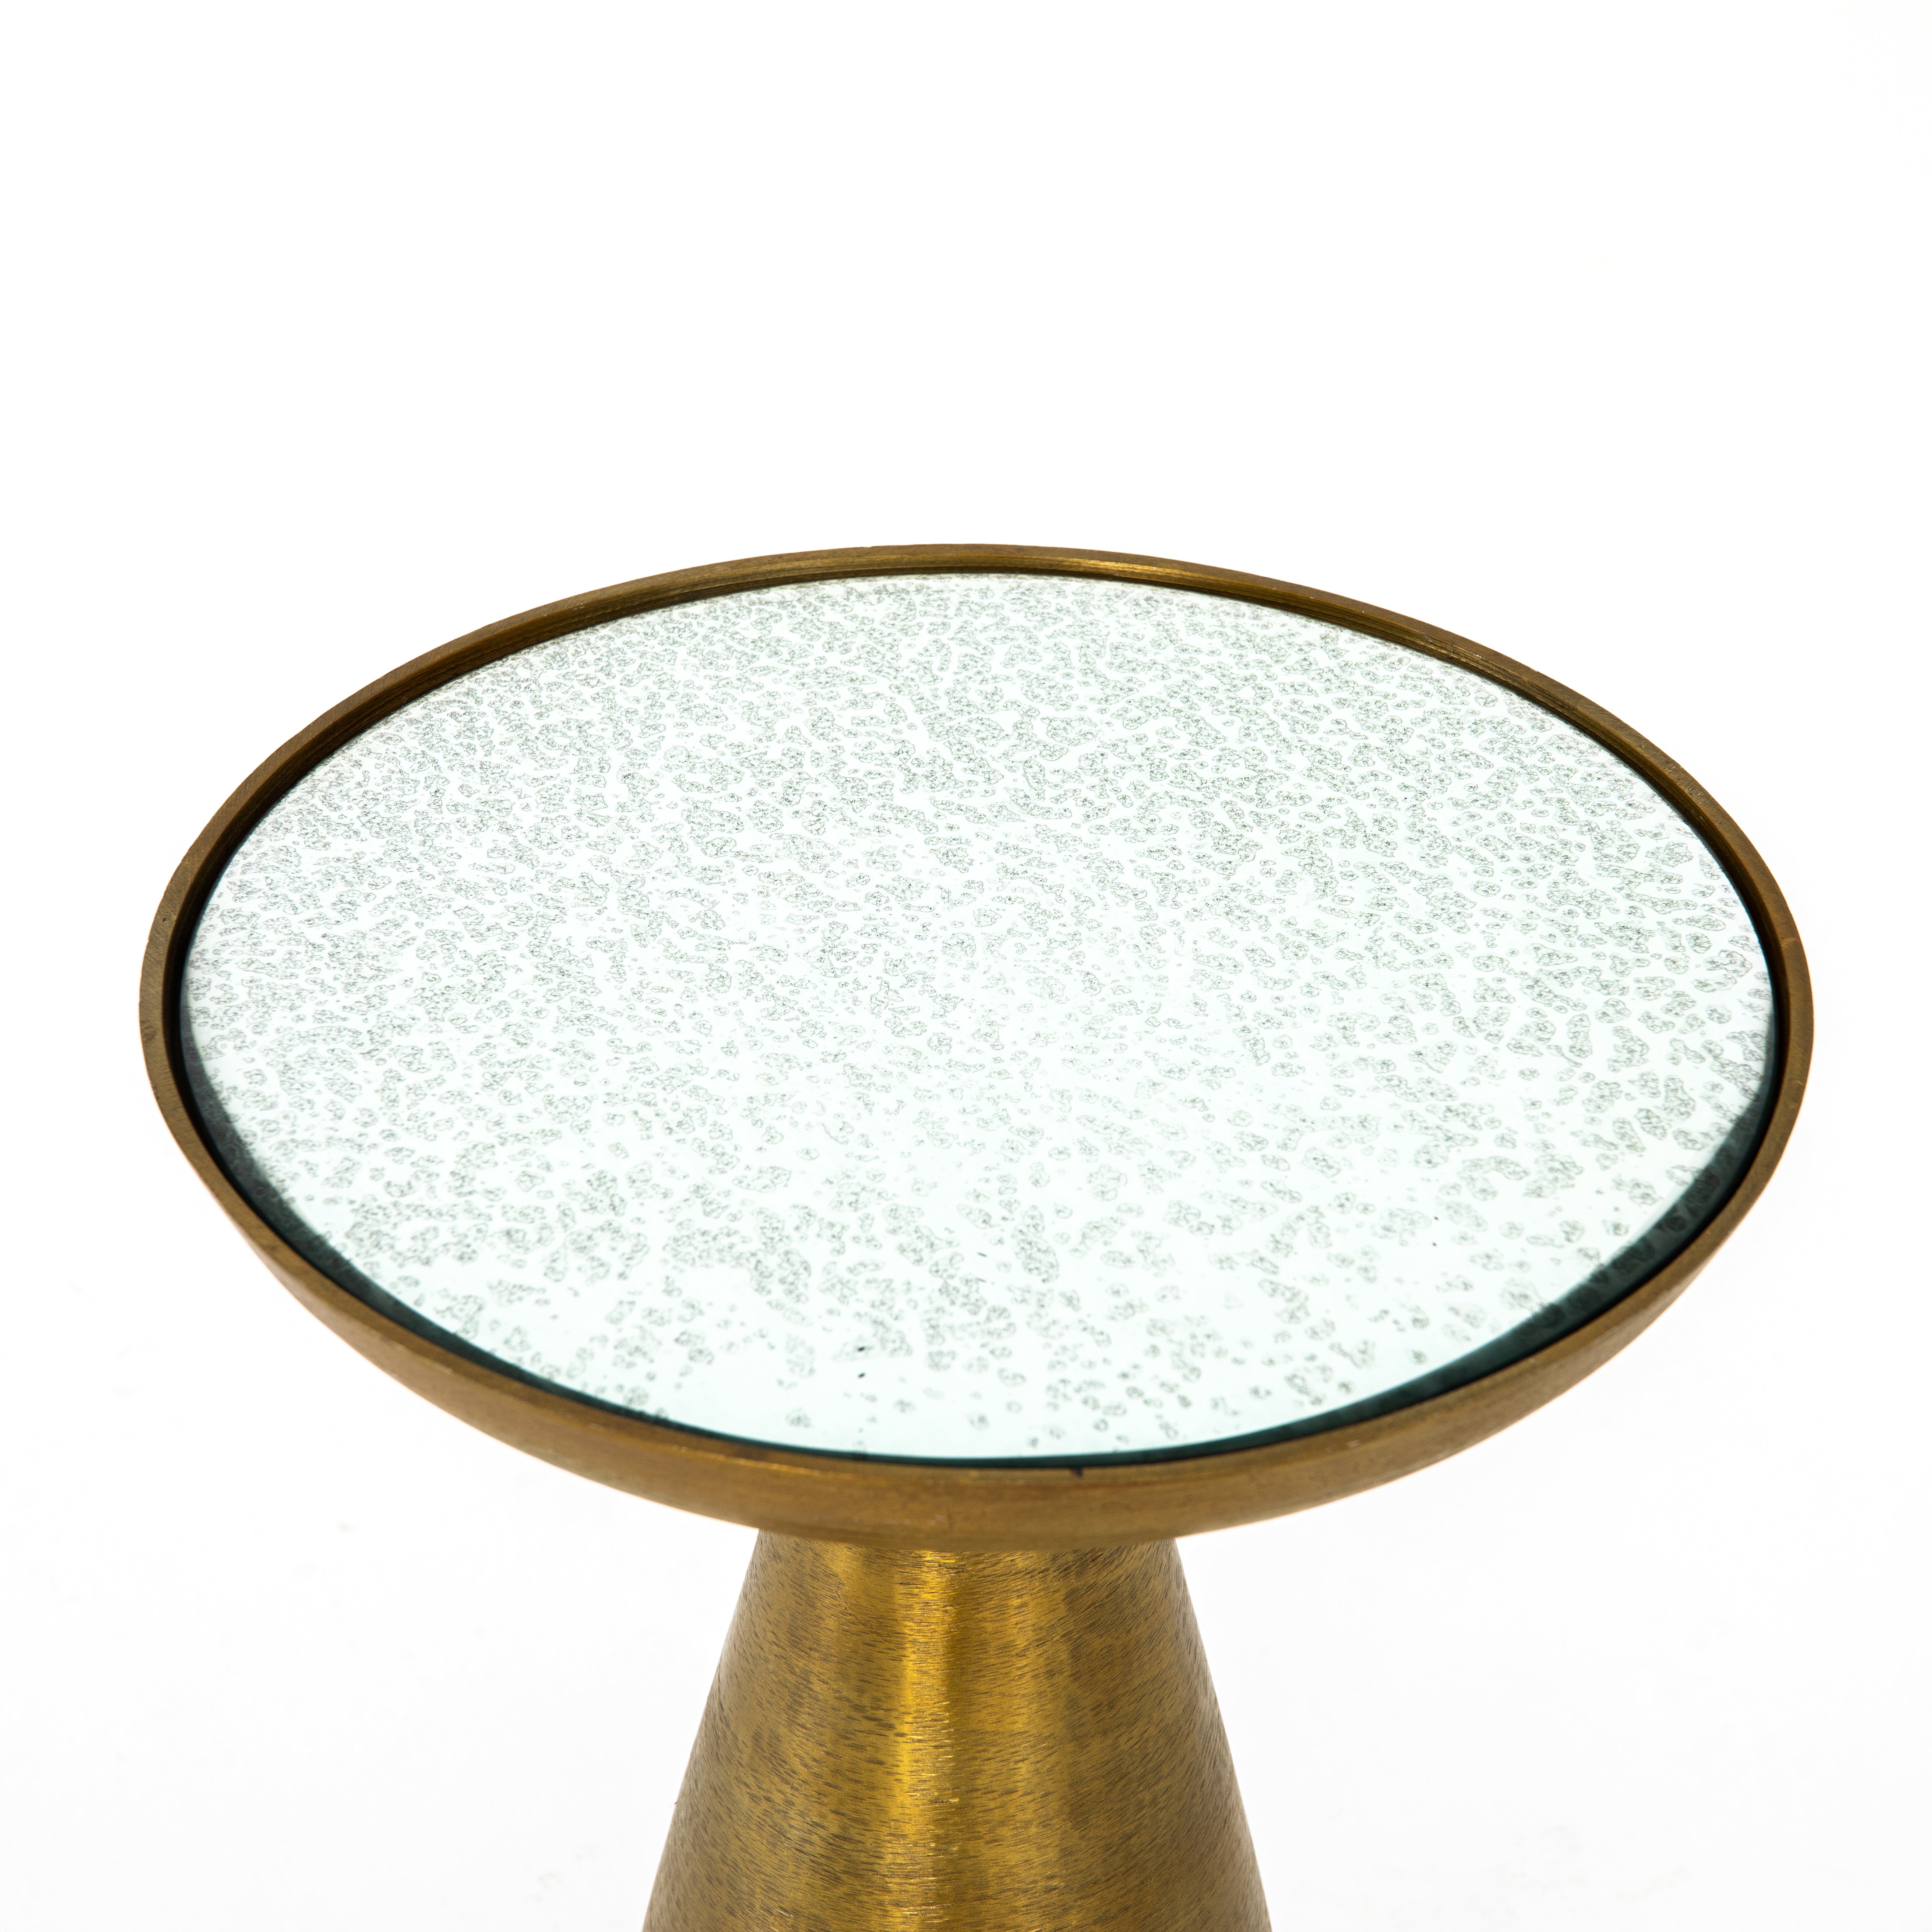 Brushed Brass with Ash Glass | Marlow Mod Pedestal Table | Valley Ridge Furniture